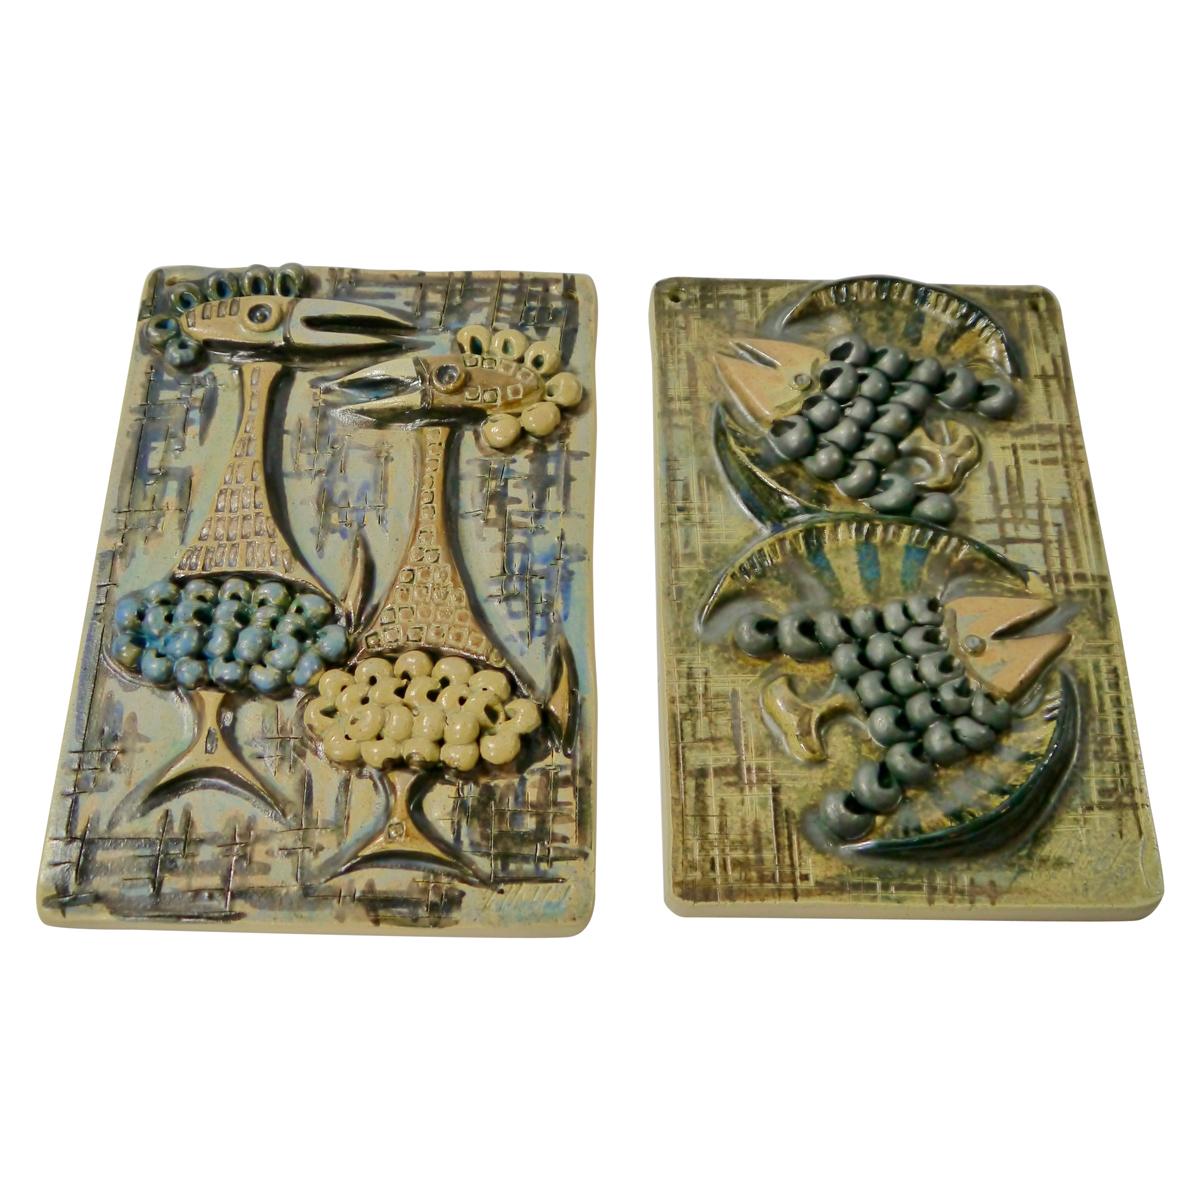 Pair of Ceramic Wall Plaques by Ulla Winblad, Sweden, 1960s